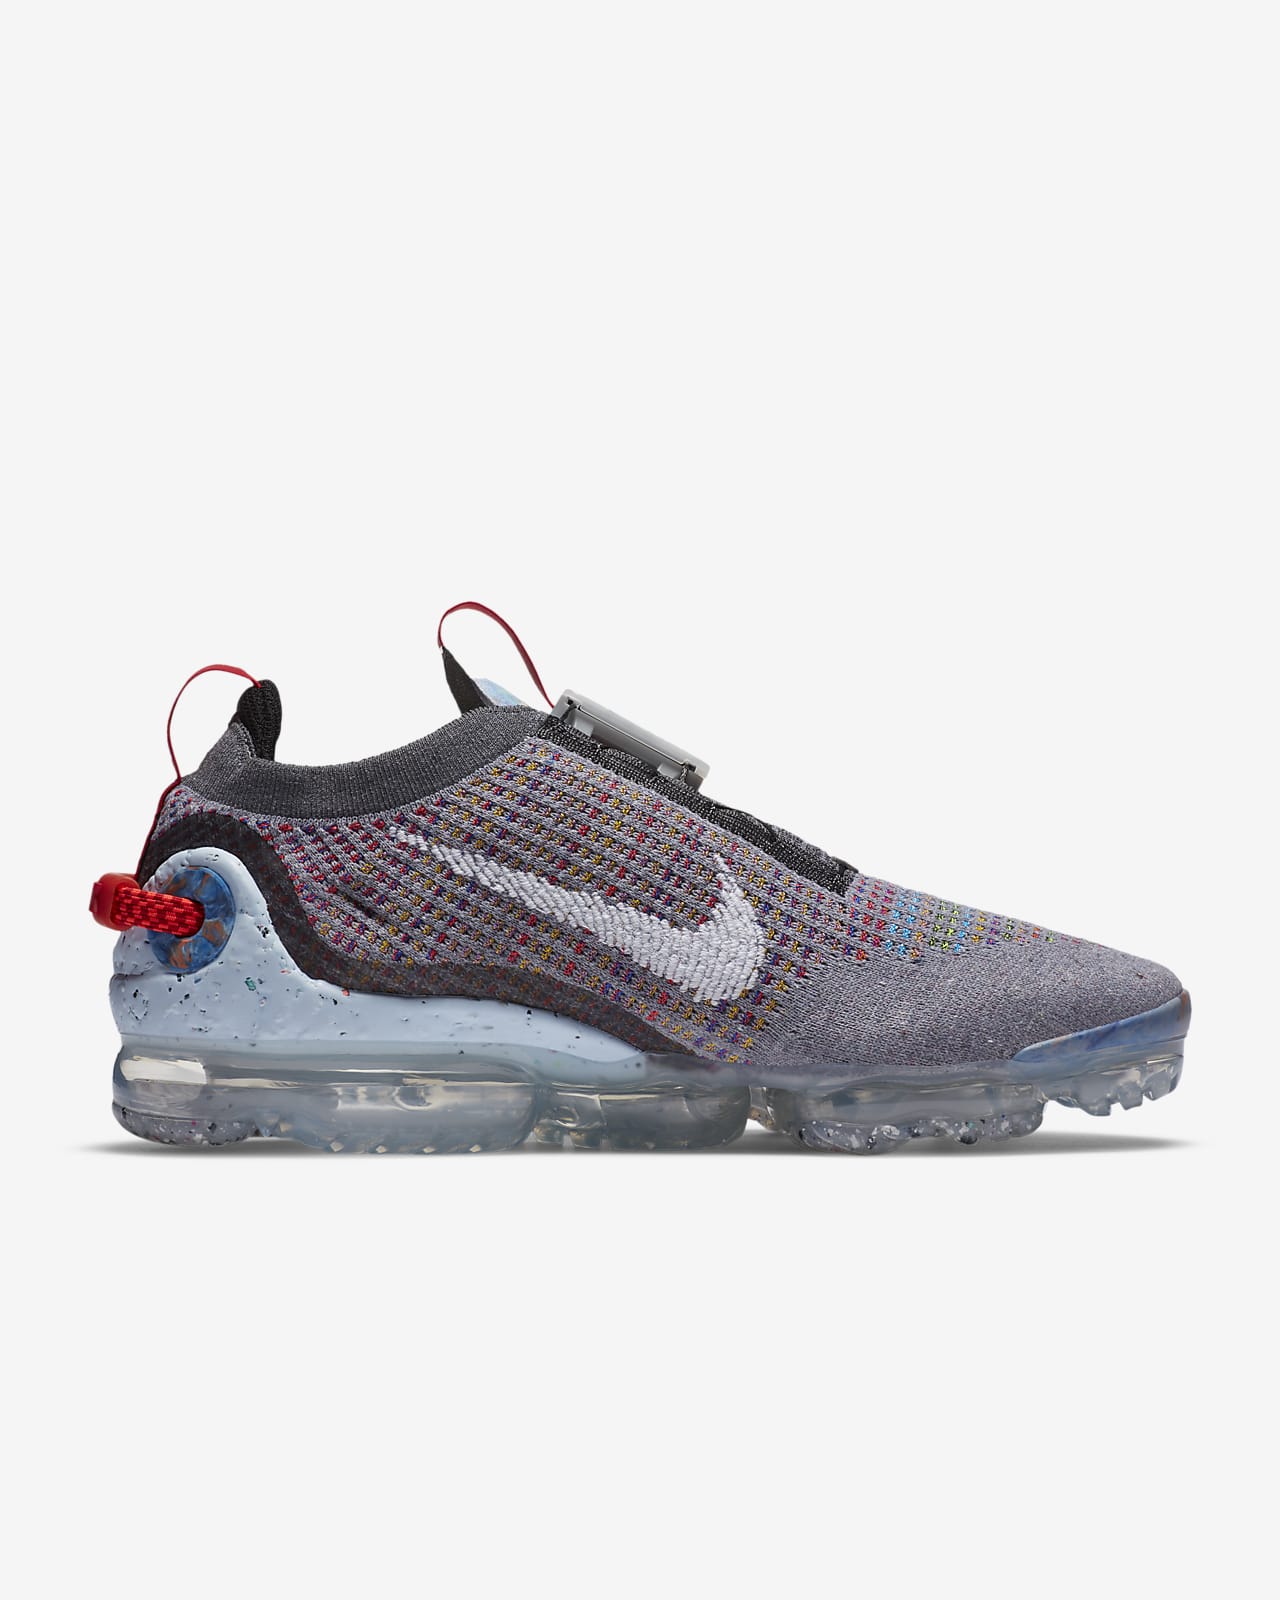 Sneakers Nike VaporMax May 2020 in Indonesia Priceprice